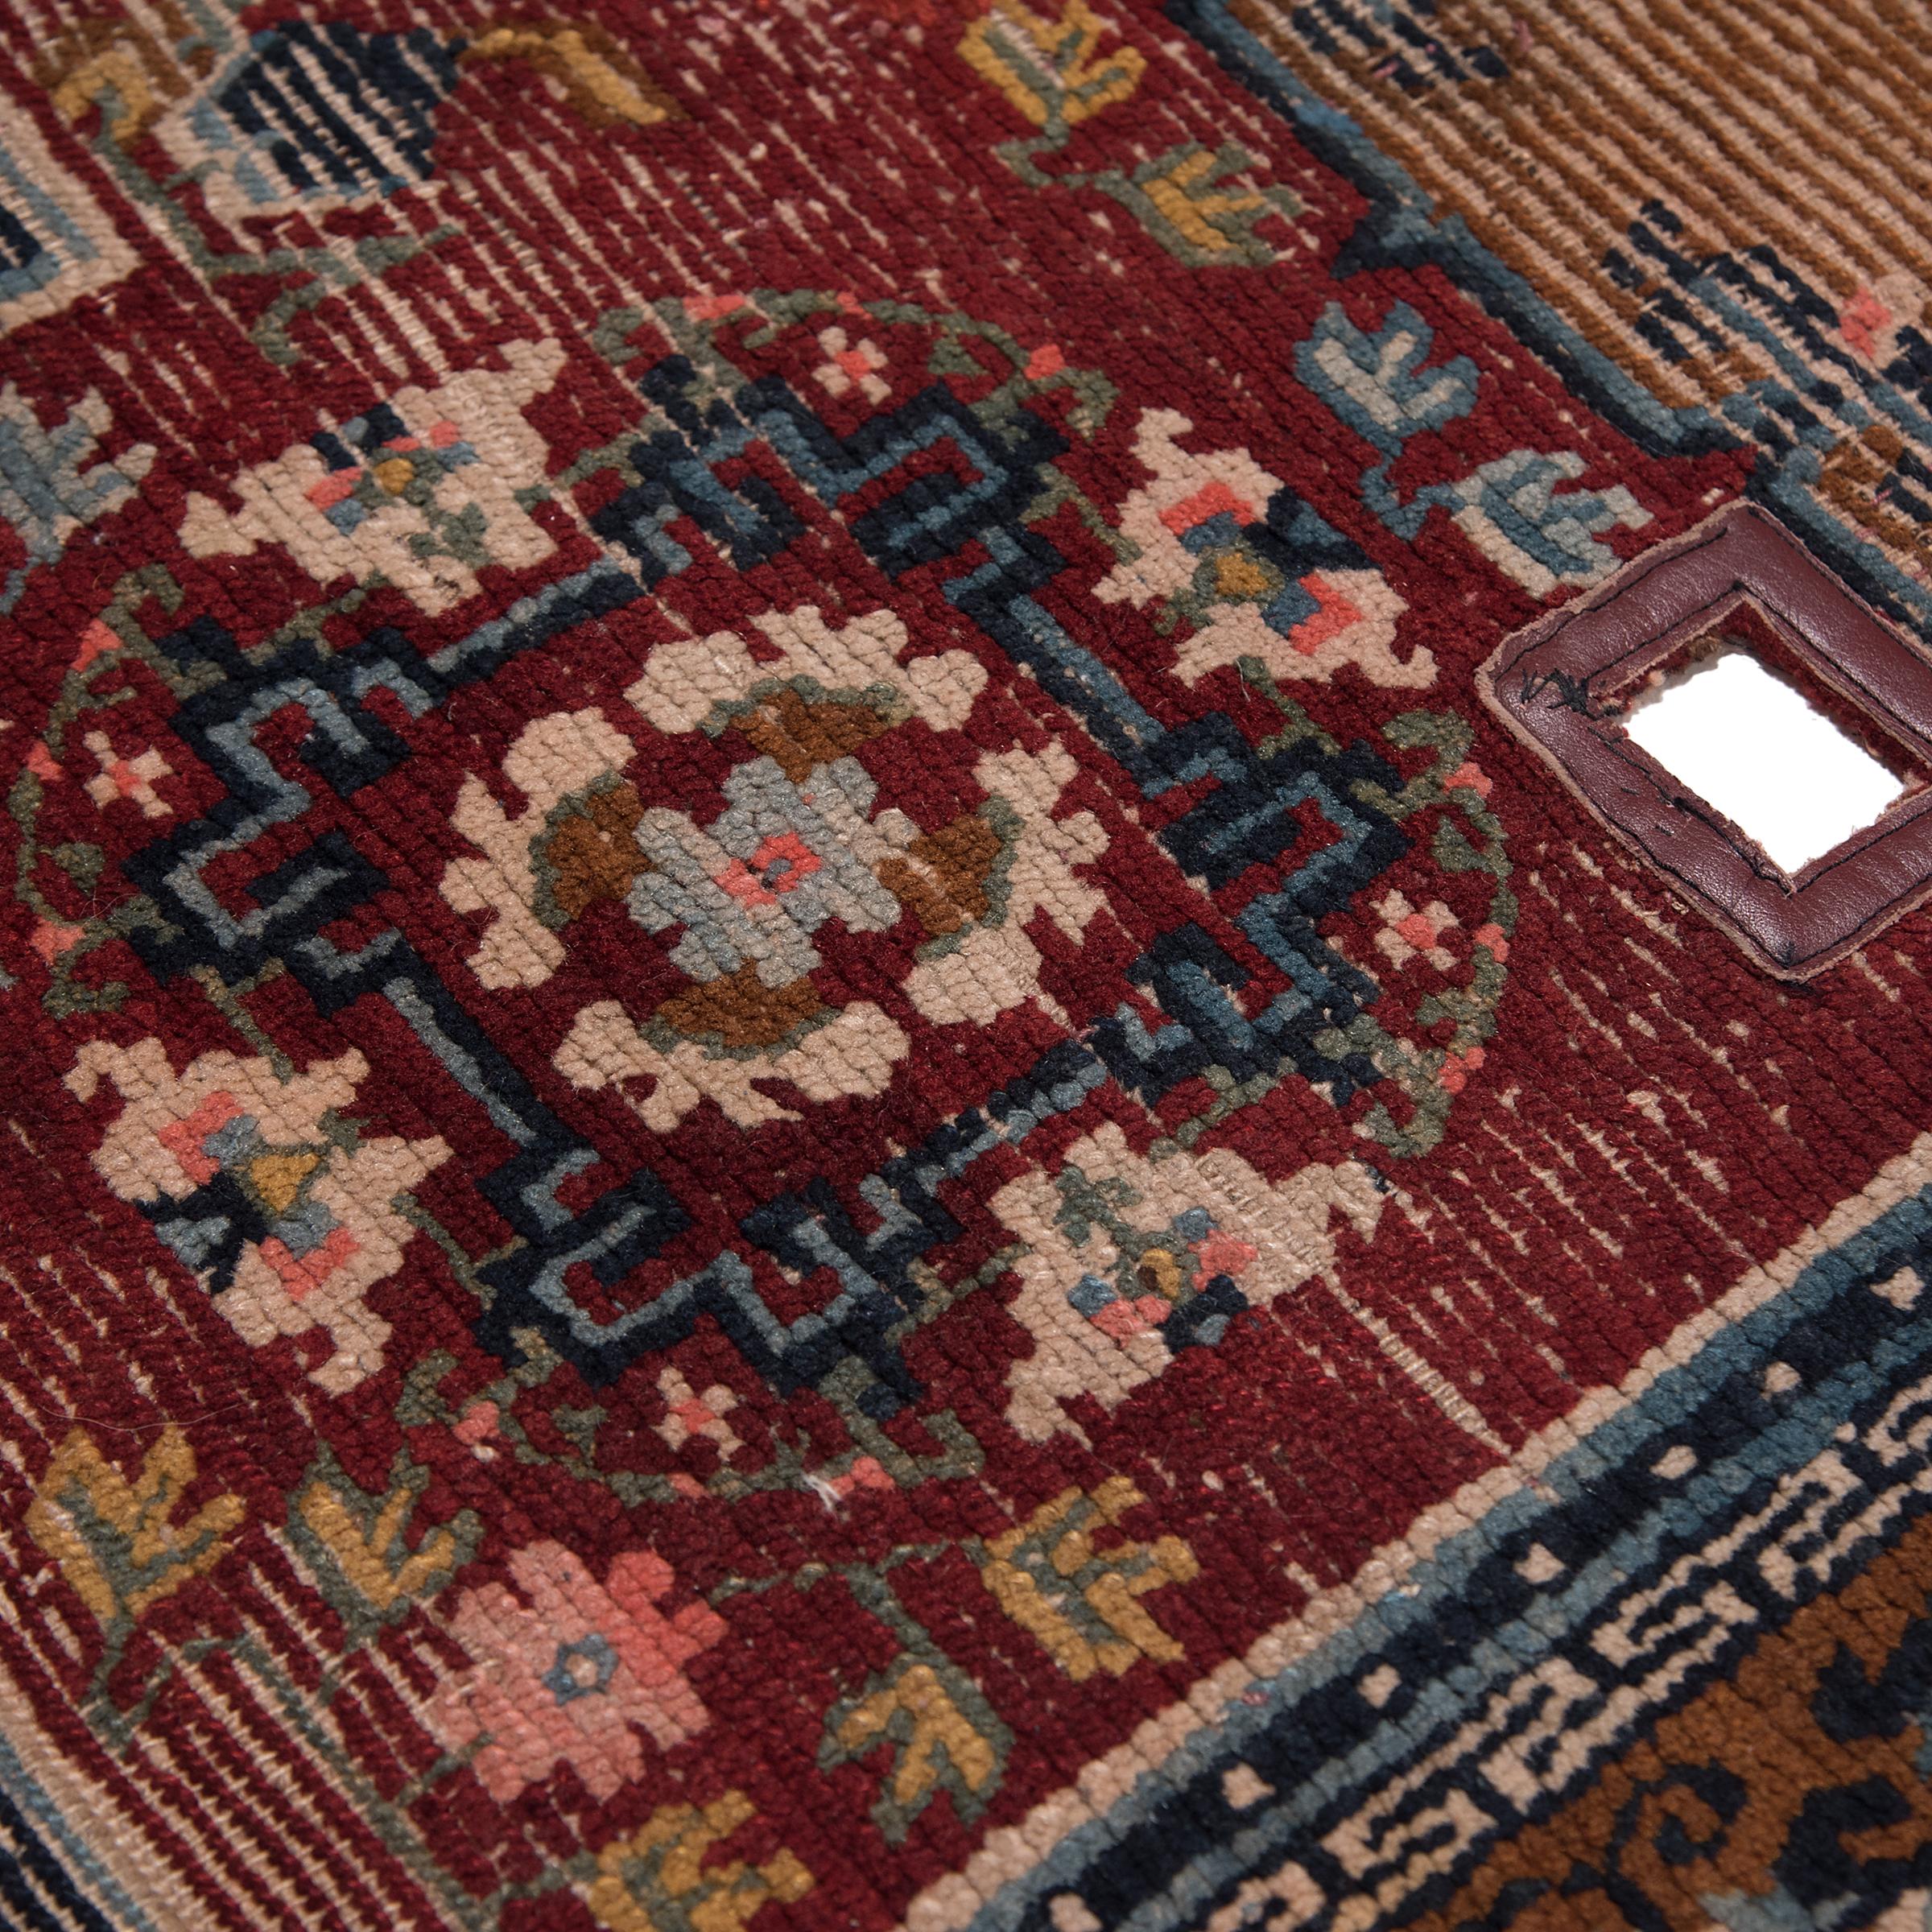 Vegetable Dyed Tibetan Saddle Carpet with Floral Medallions, c. 1900 For Sale